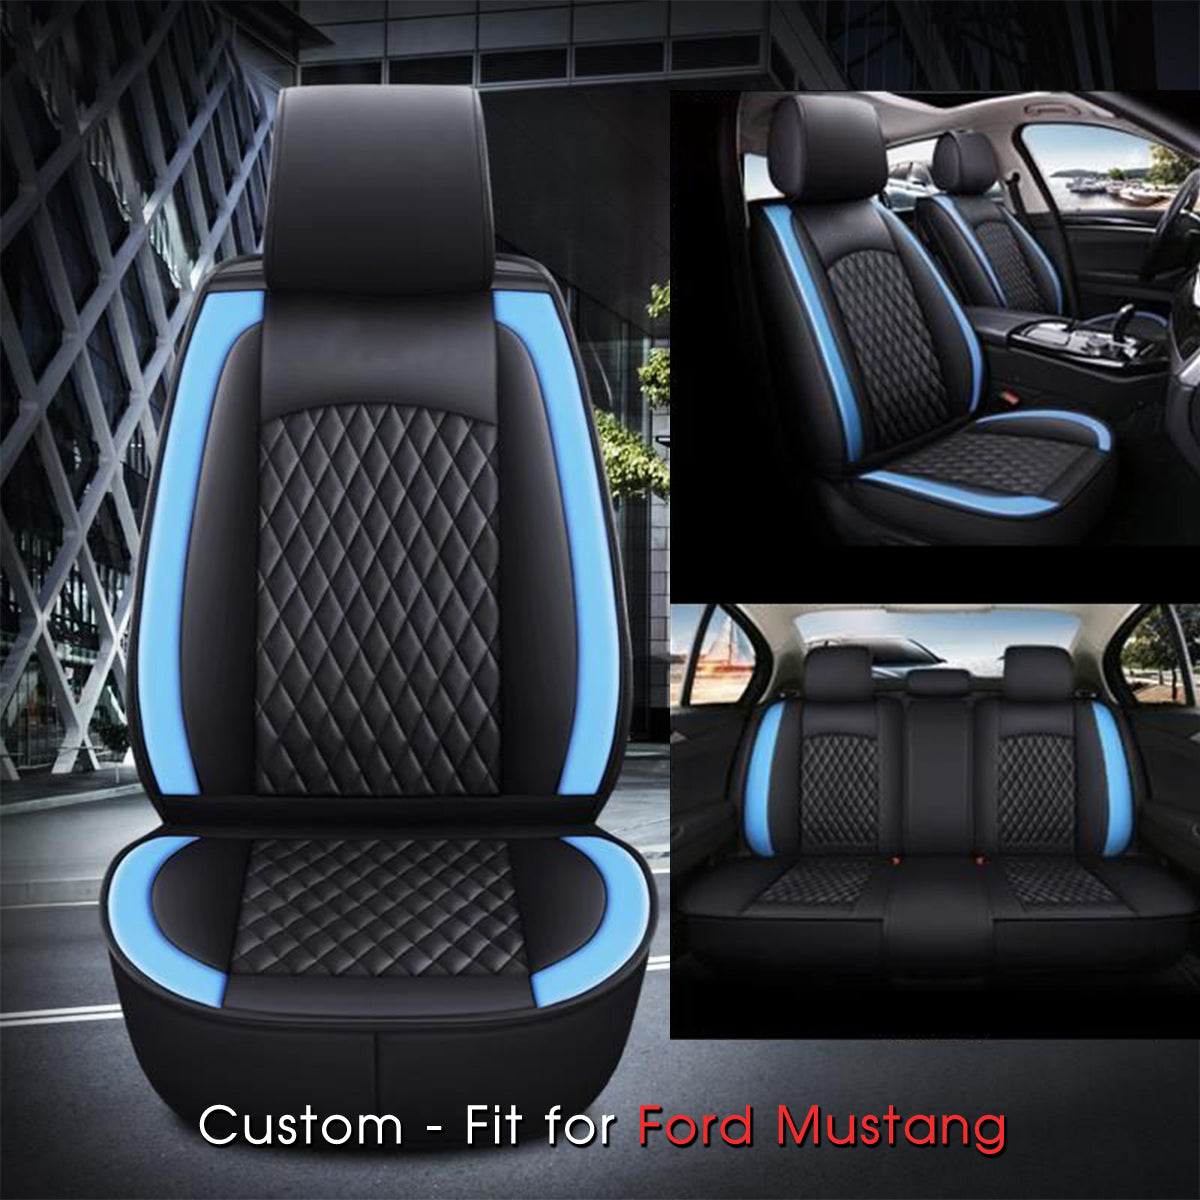 2 Car Seat Covers Full Set, Custom-Fit For Car, Waterproof Leather Front Rear Seat Automotive Protection Cushions, Car Accessories DLFM211